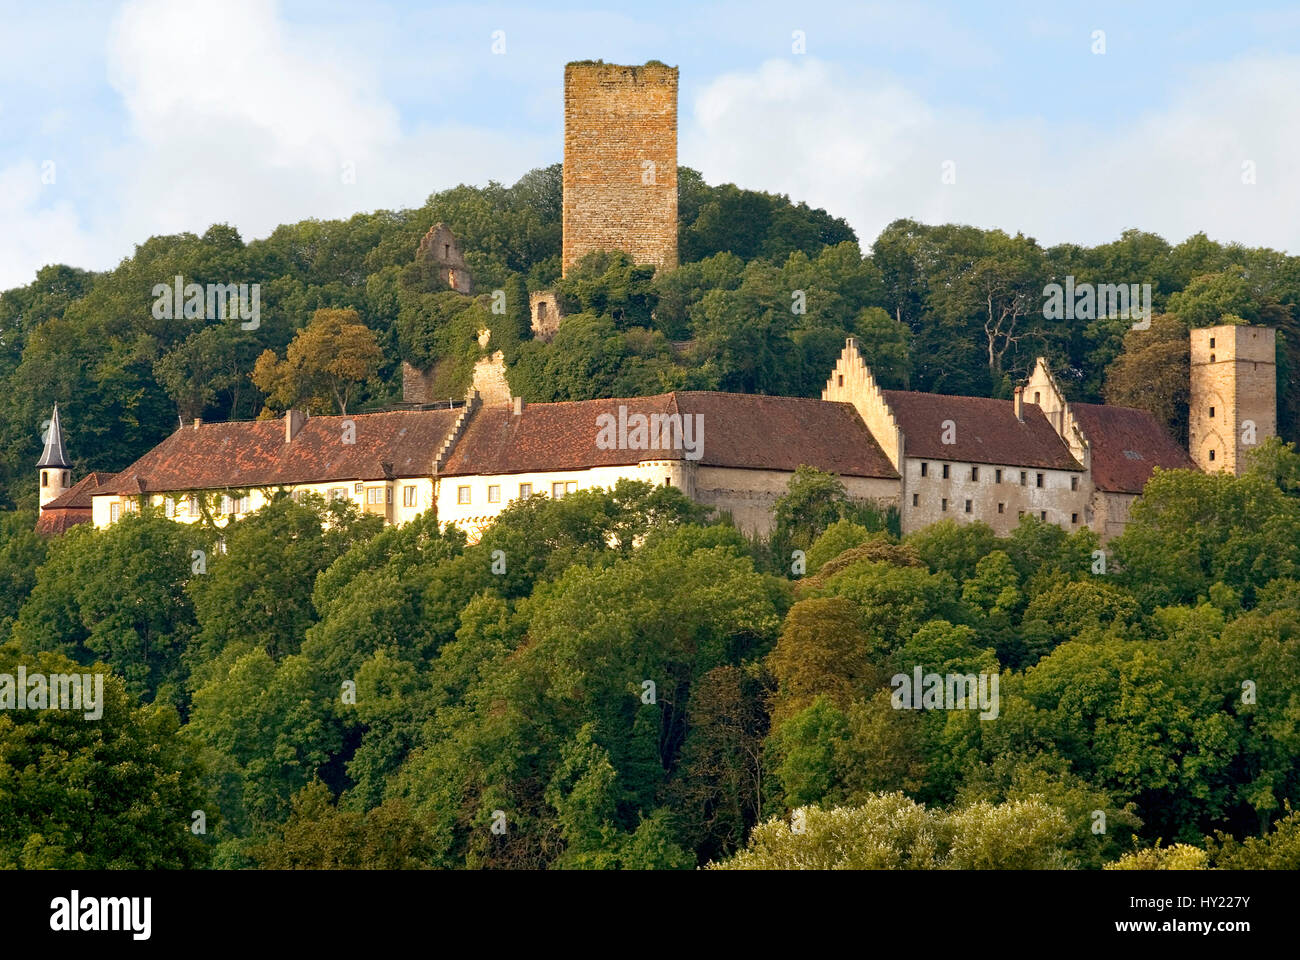 Image of the Castle Guttenberg at the River Neckar the German state of Baden WÃ¼rttemberg.  Blick auf die Burg Guttenberg in Baden WÃ¼rttemberg, Deuts Stock Photo